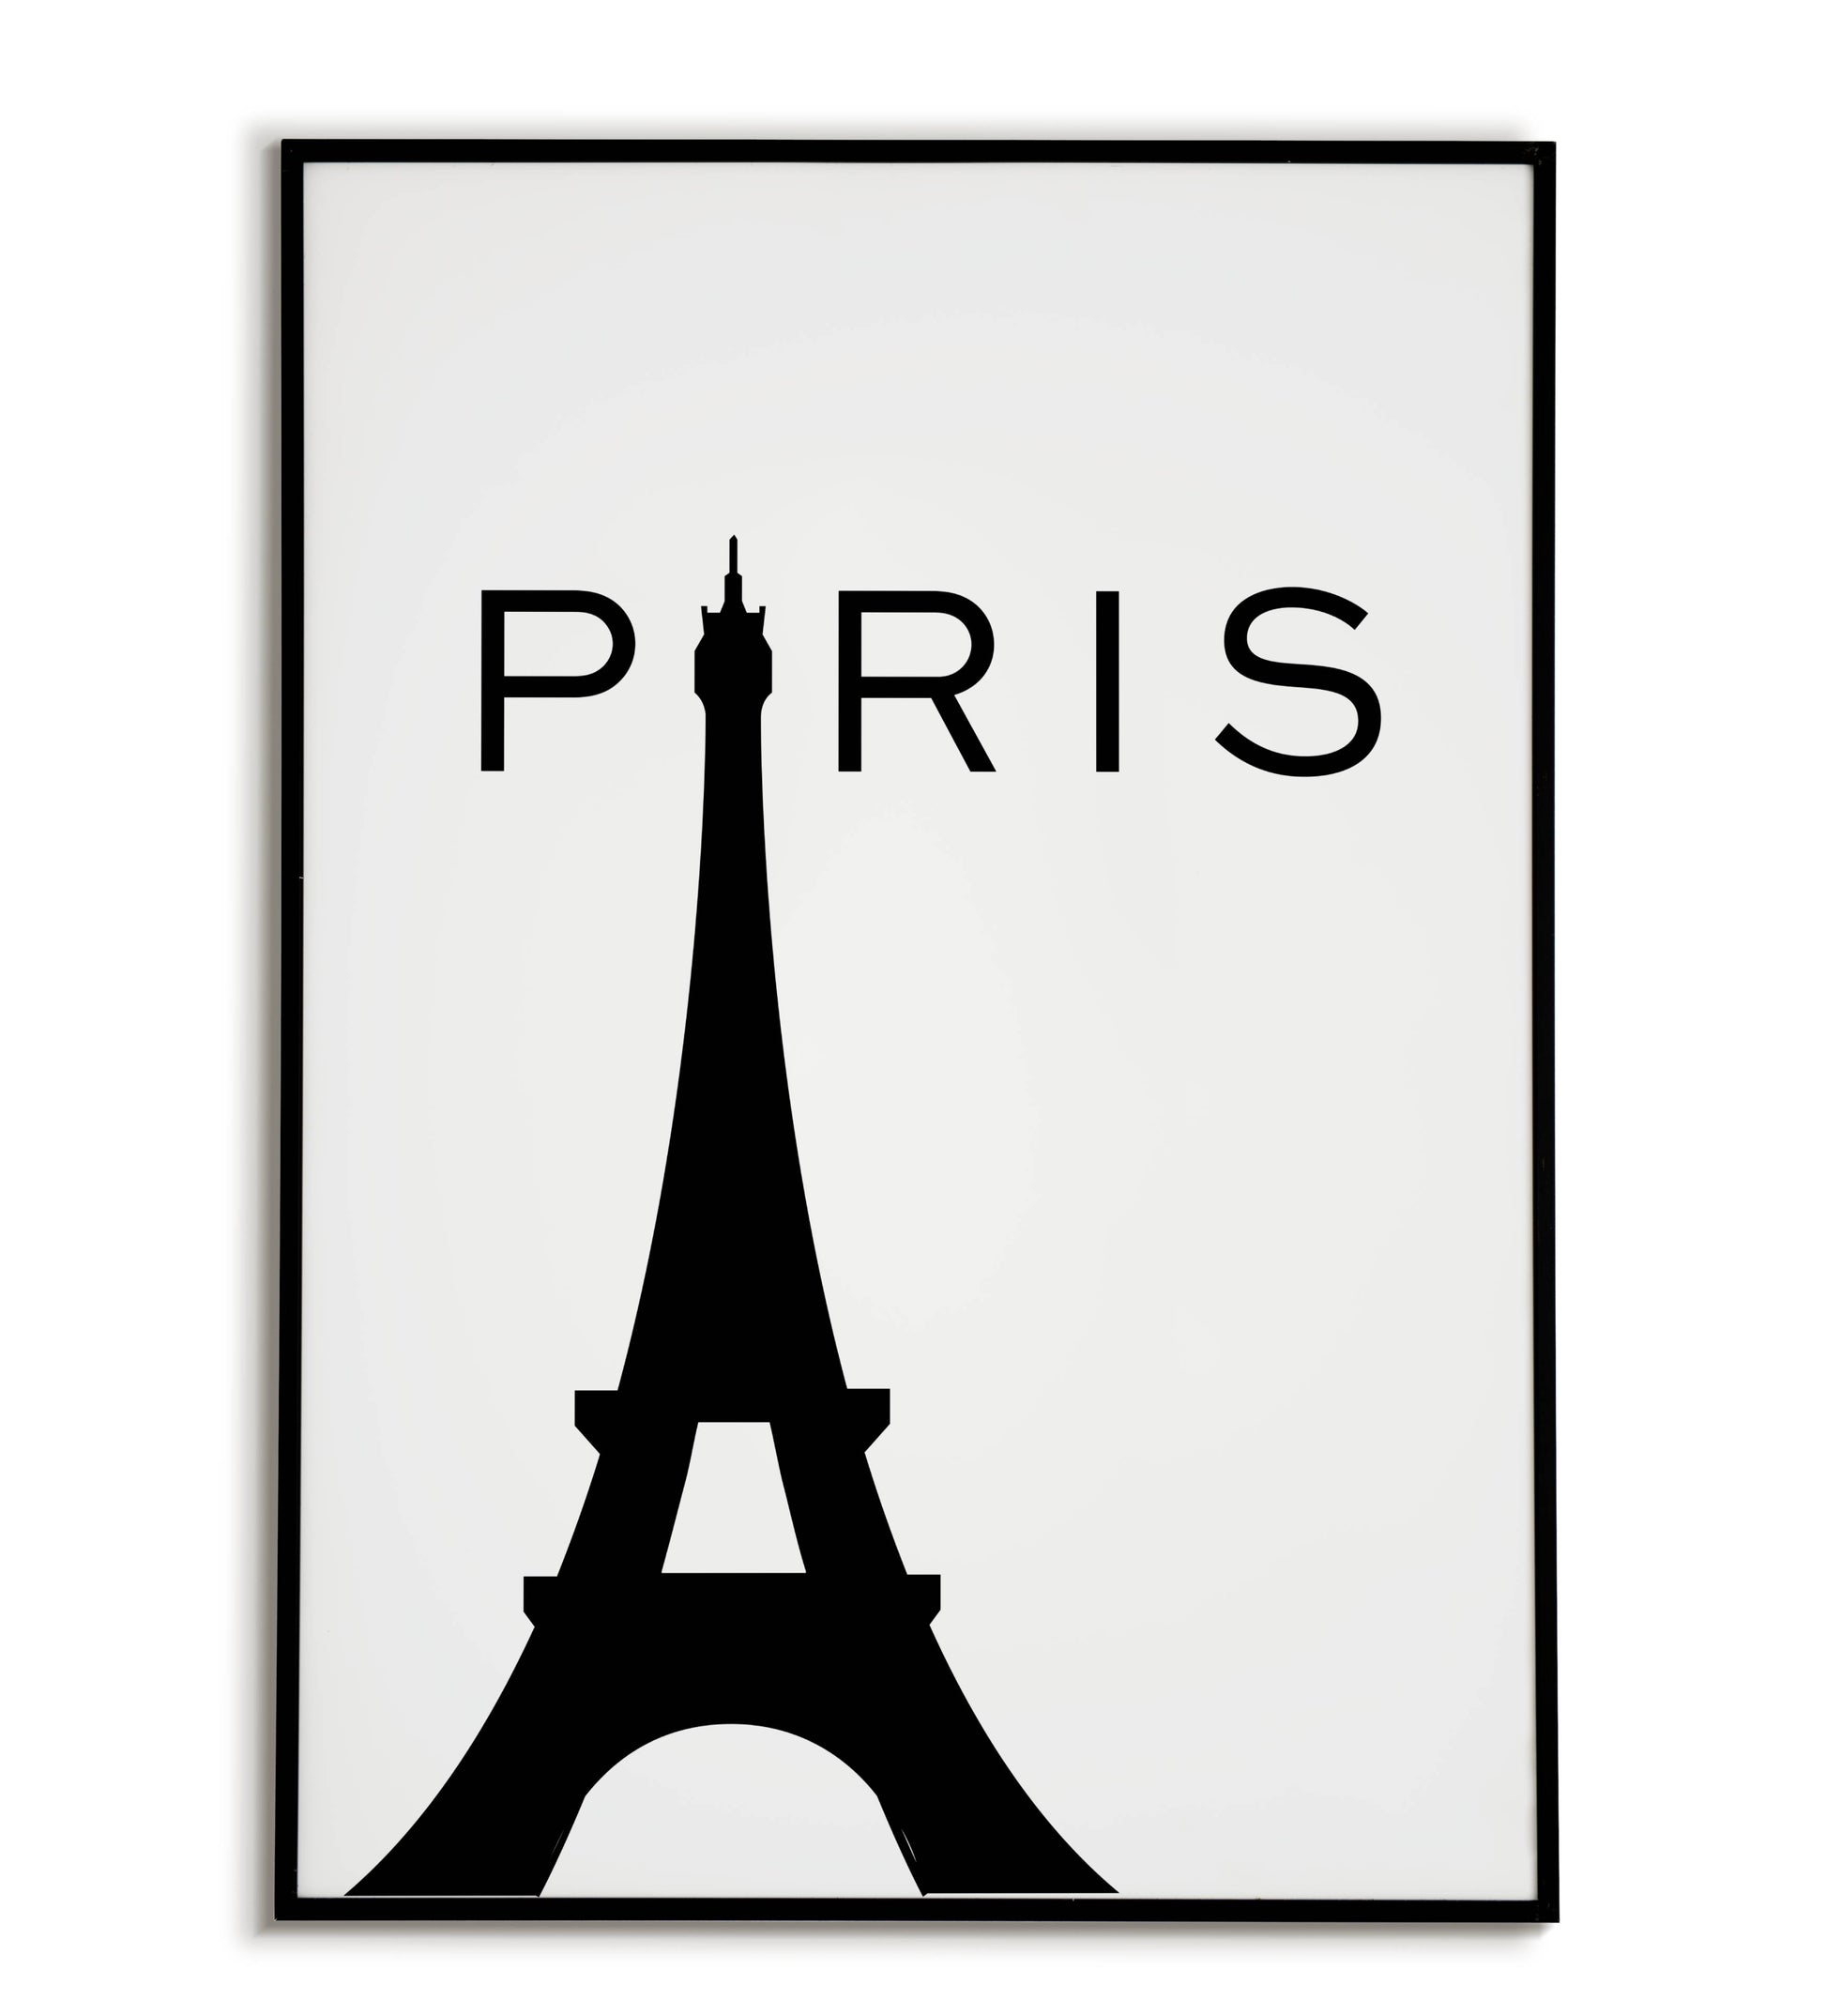 Paris printable wall art poster. Iconic city name in a stylish font.